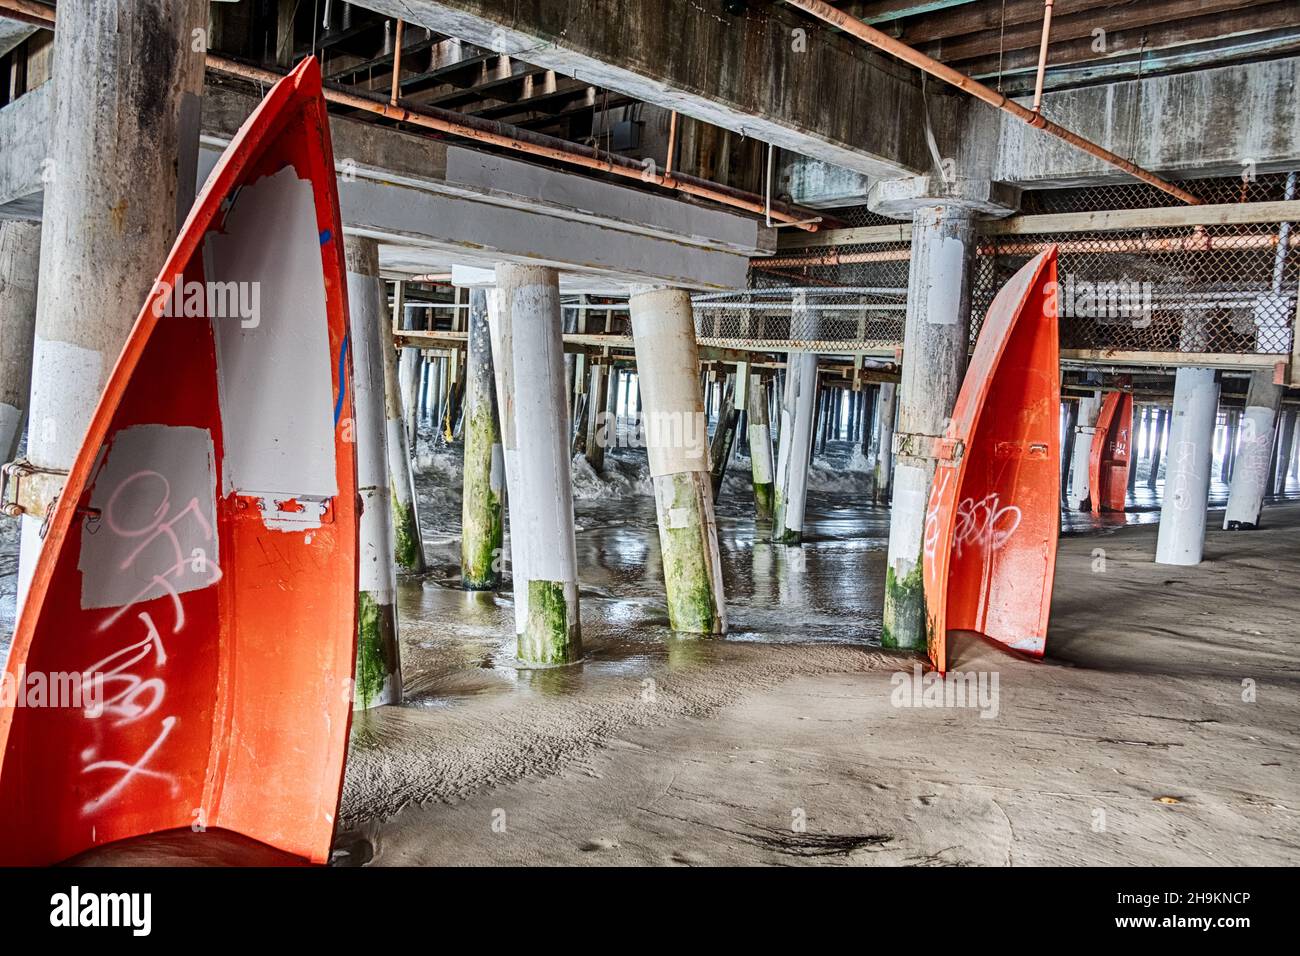 SANTA MONICA, CALIFORNIA - SEPTEMBER 29, 2019: A view of the pilings and old wood lifeguard rescue boats under the Santa Monica pier. Stock Photo